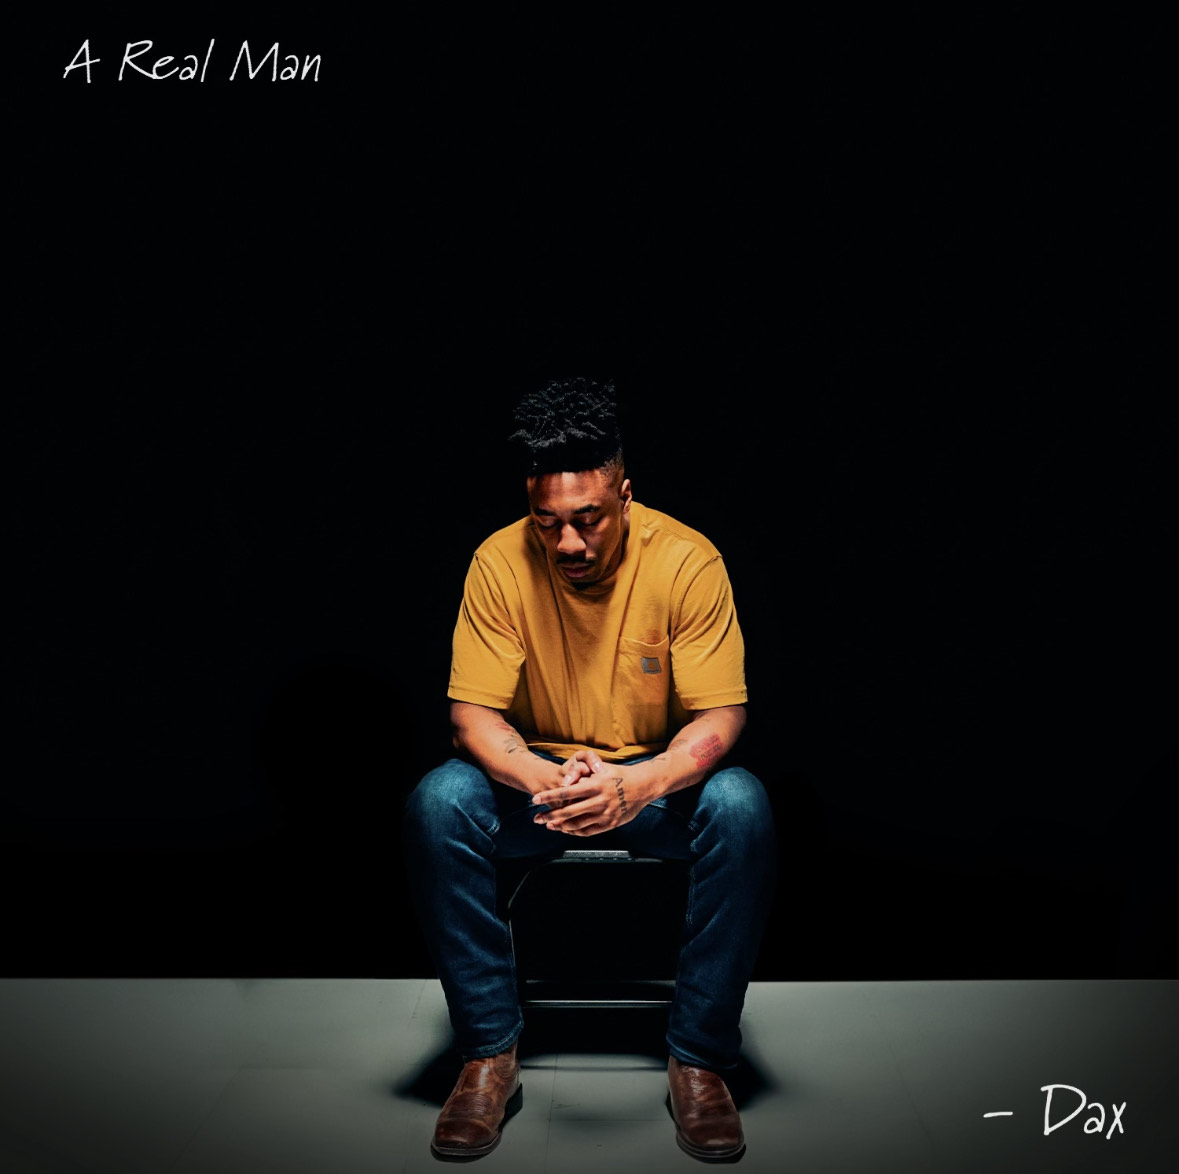 A Real Man song by Dax cover art